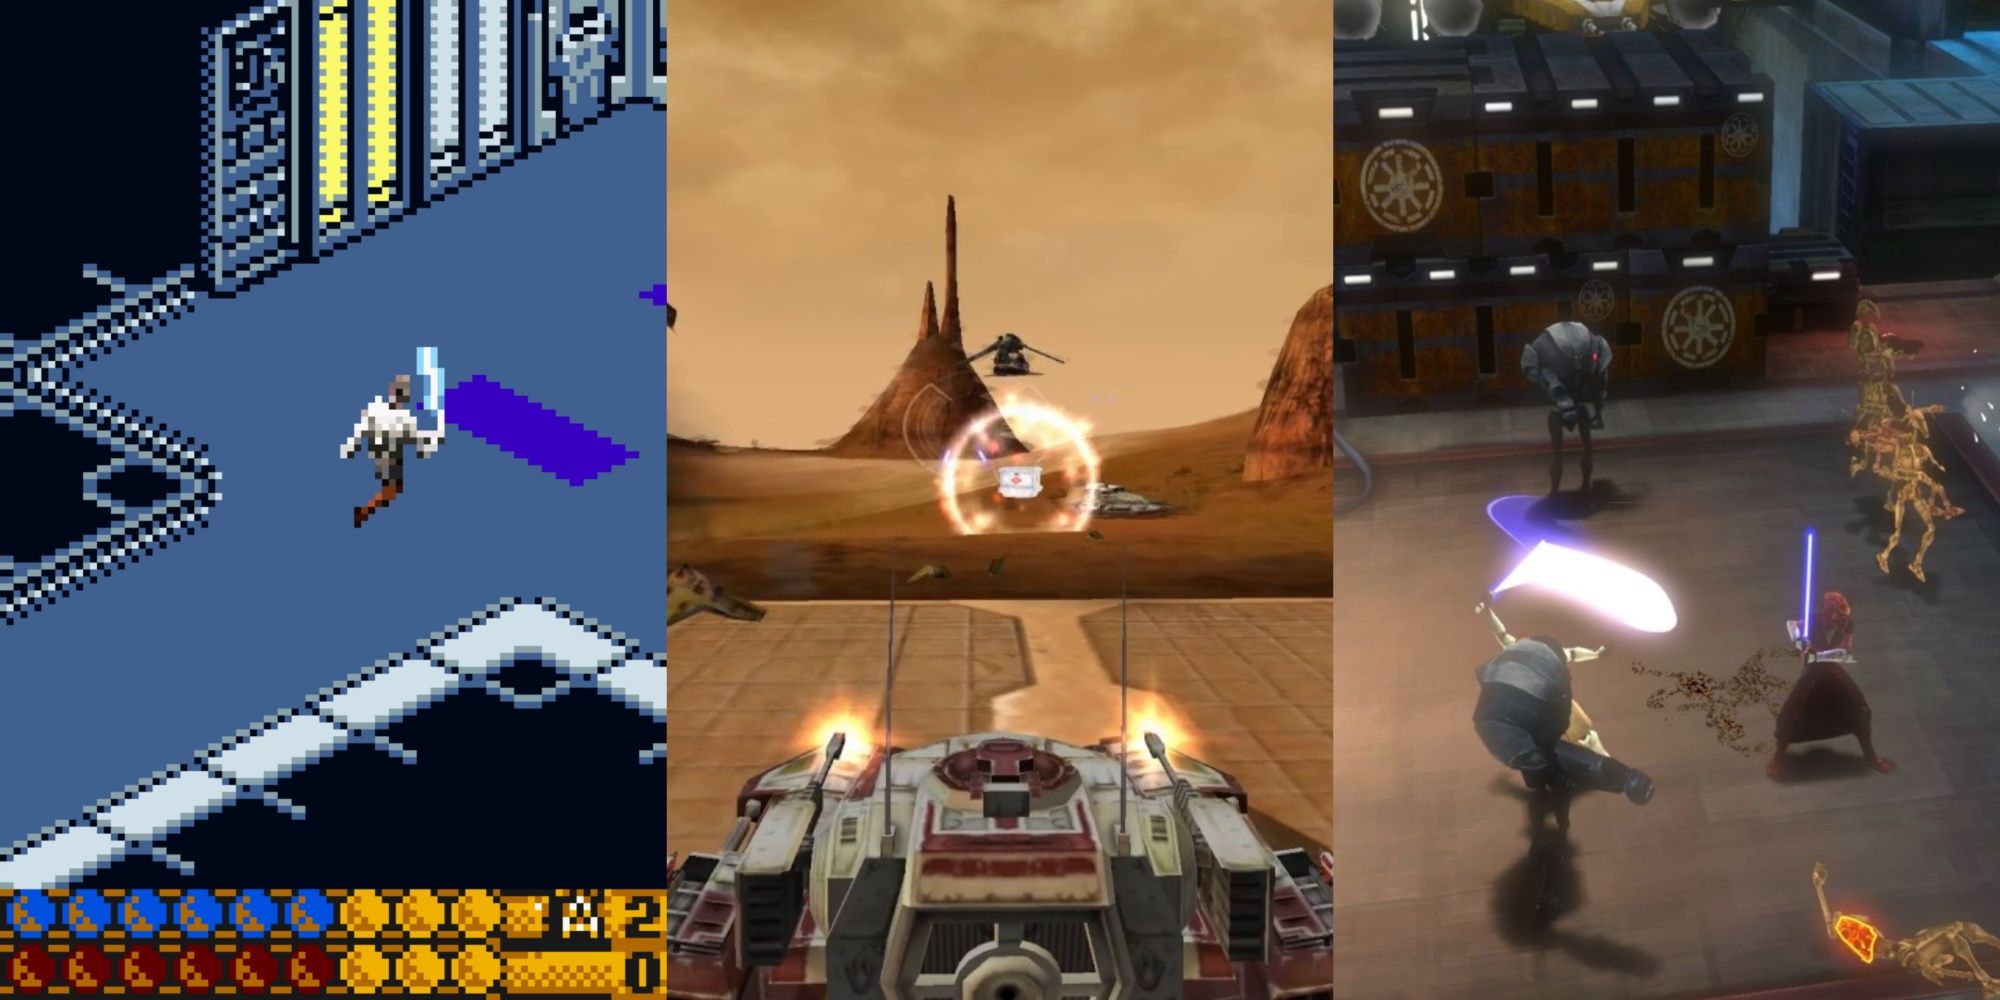 Star wars Games You Forgot About: screenshots of Obi-Wan's Adventures, The Clone Wars video game, and Republic Heroes